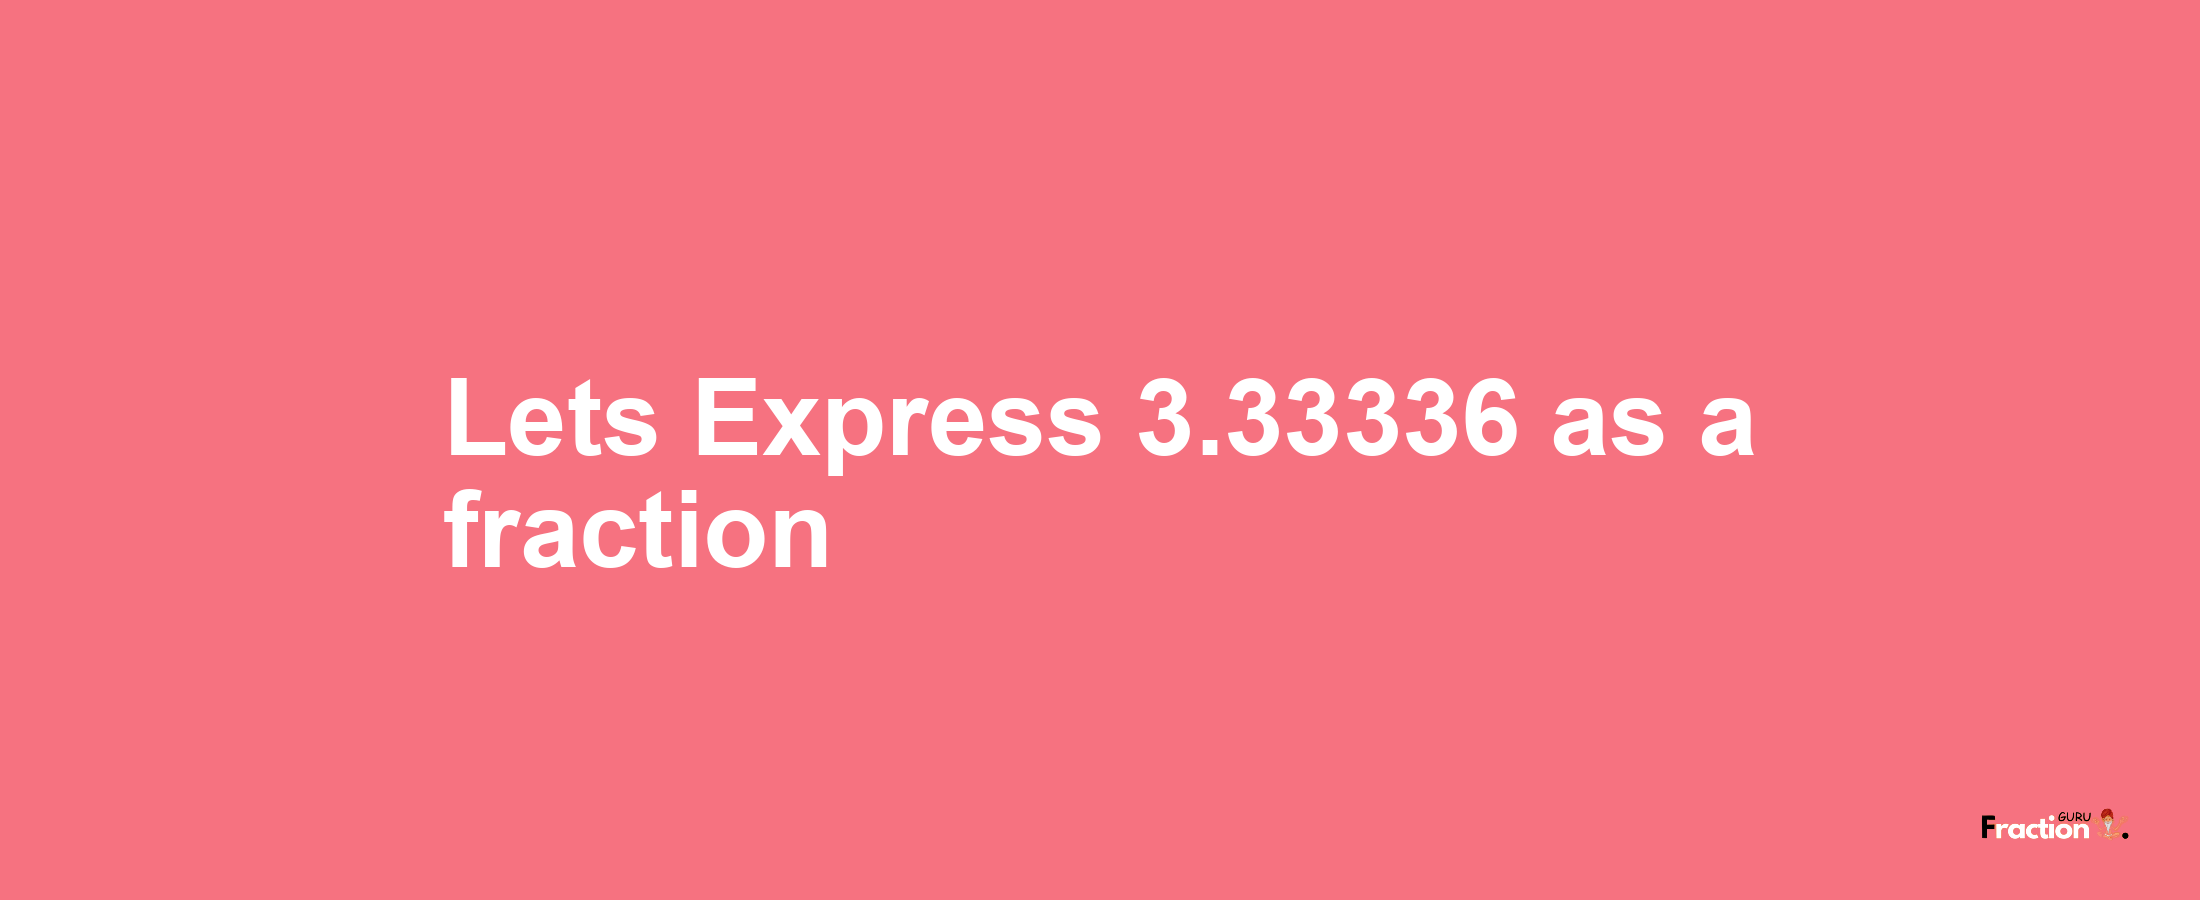 Lets Express 3.33336 as afraction